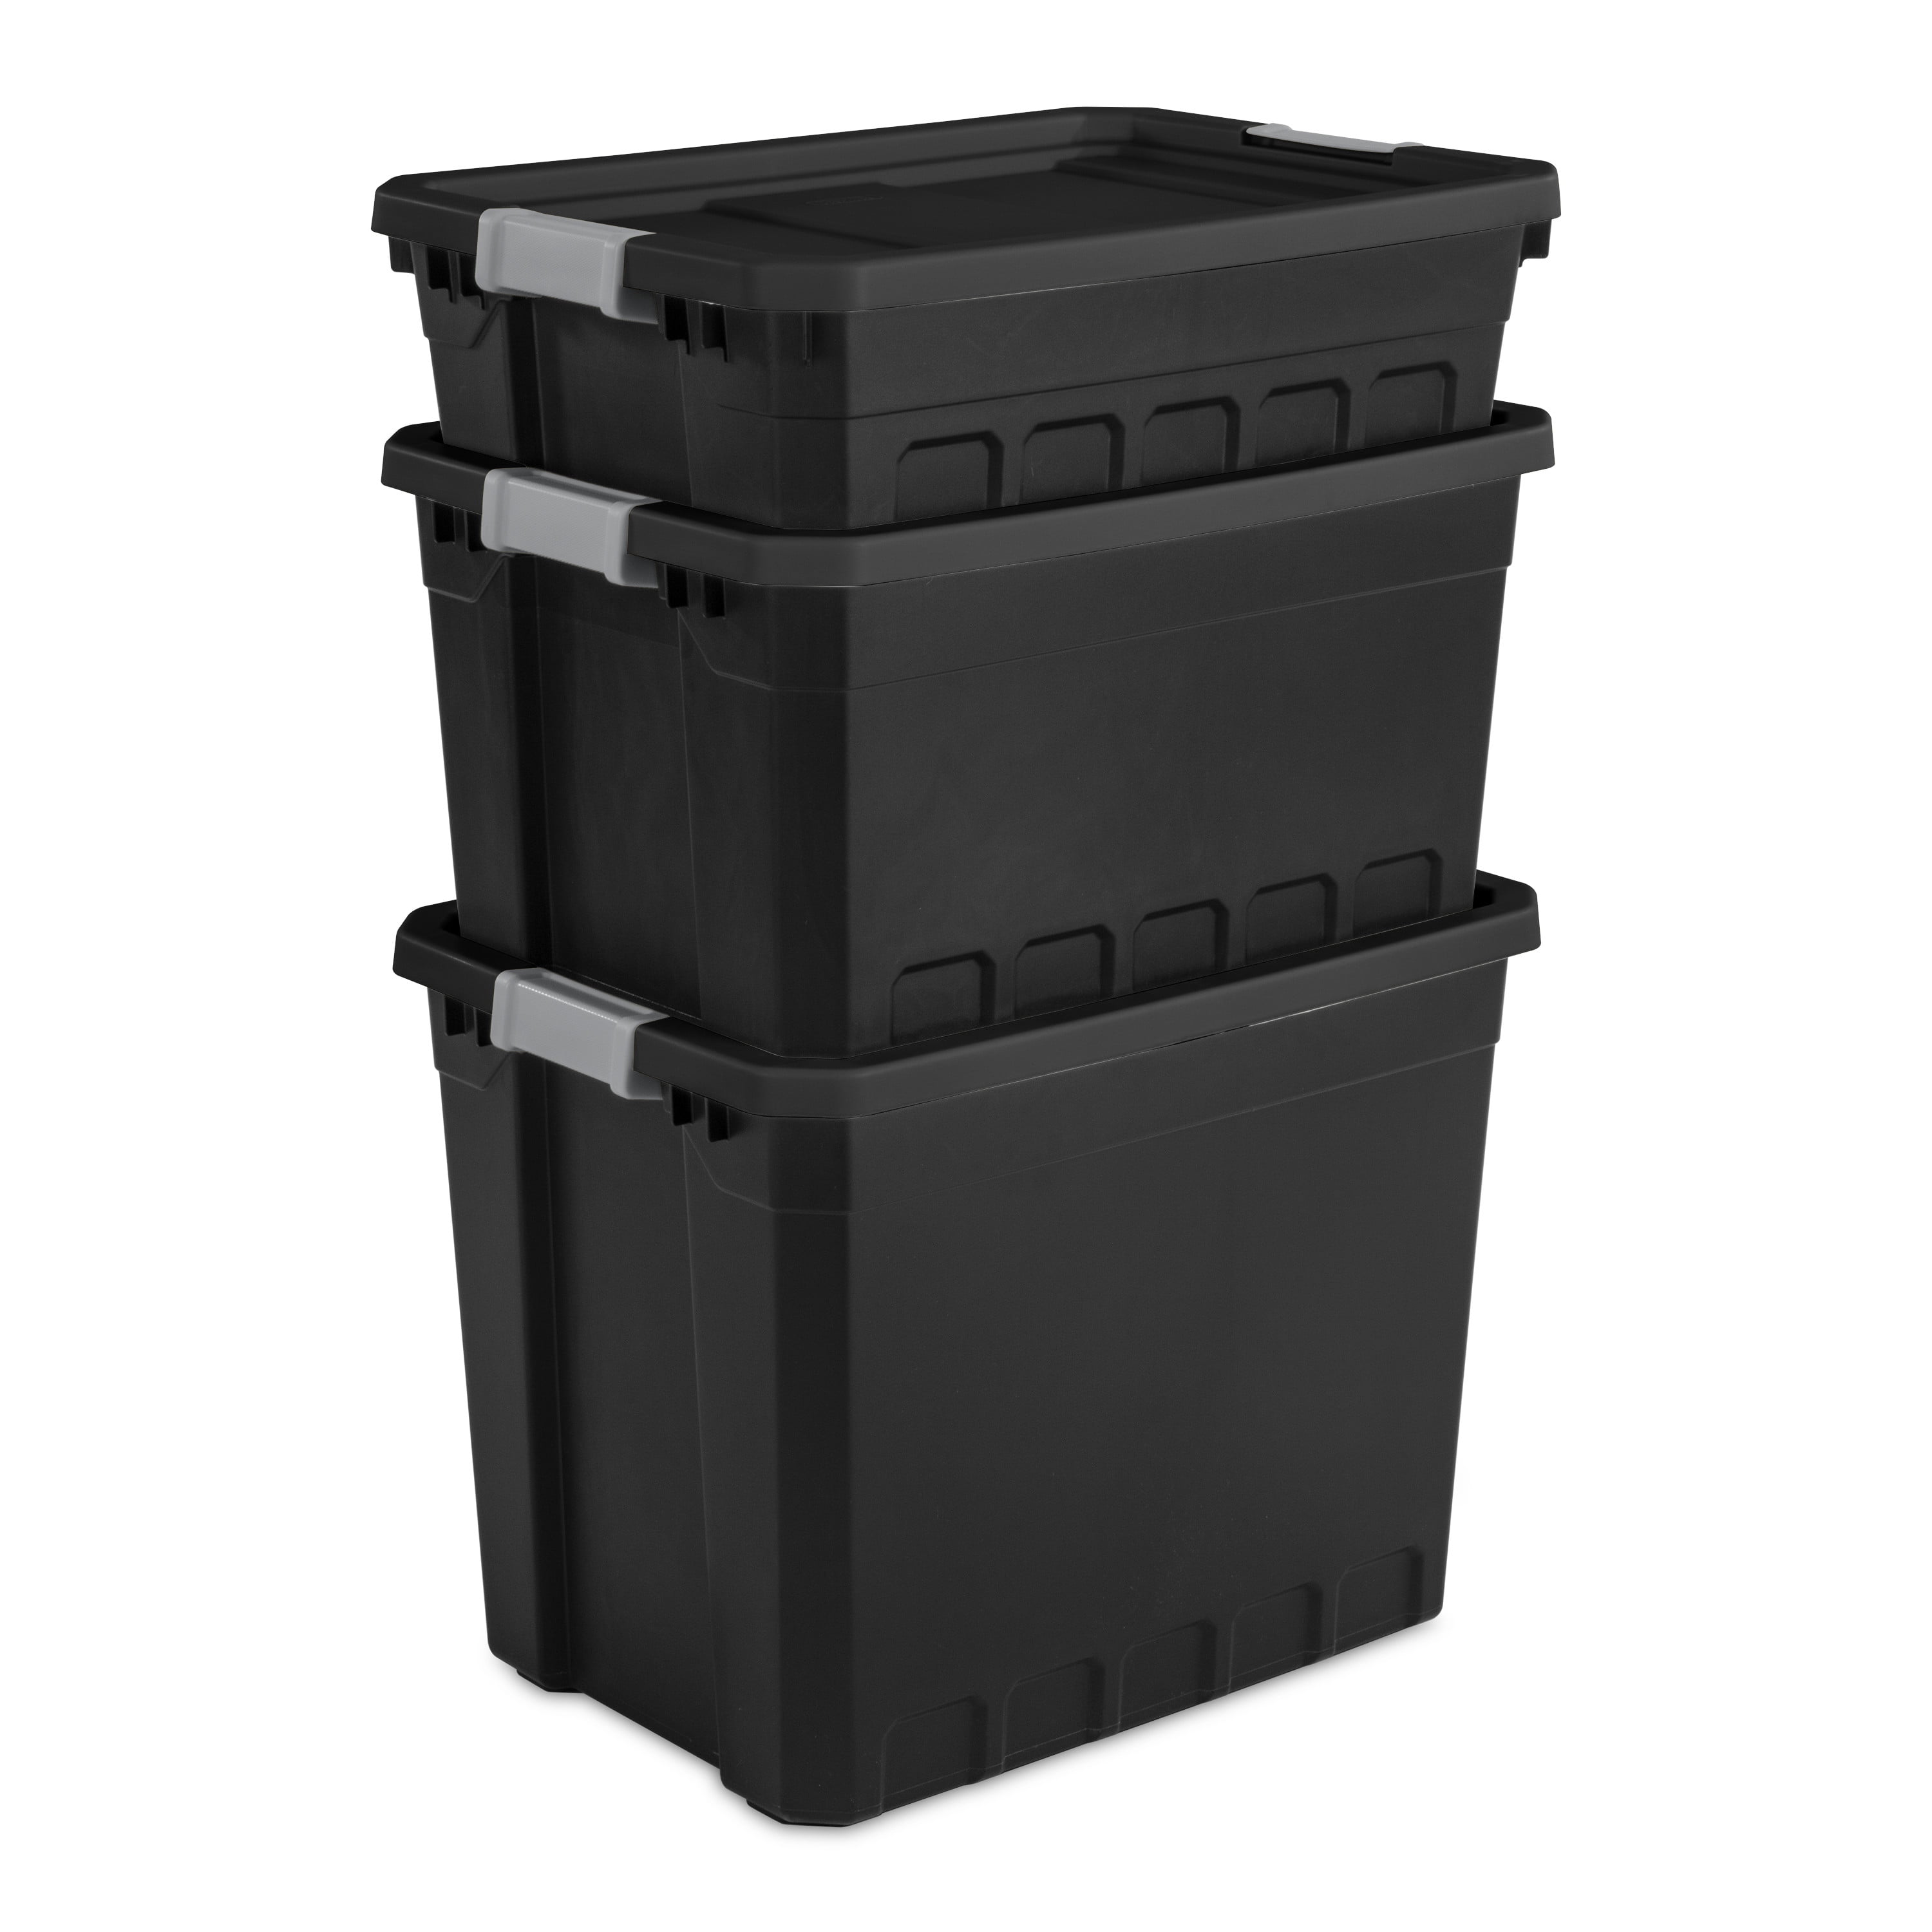  Sterilite 10 Gallon Plastic Stacker Tote, Heavy Duty Lidded Storage  Bin Container for Stackable Garage and Basement Organization, Black, 12-Pack